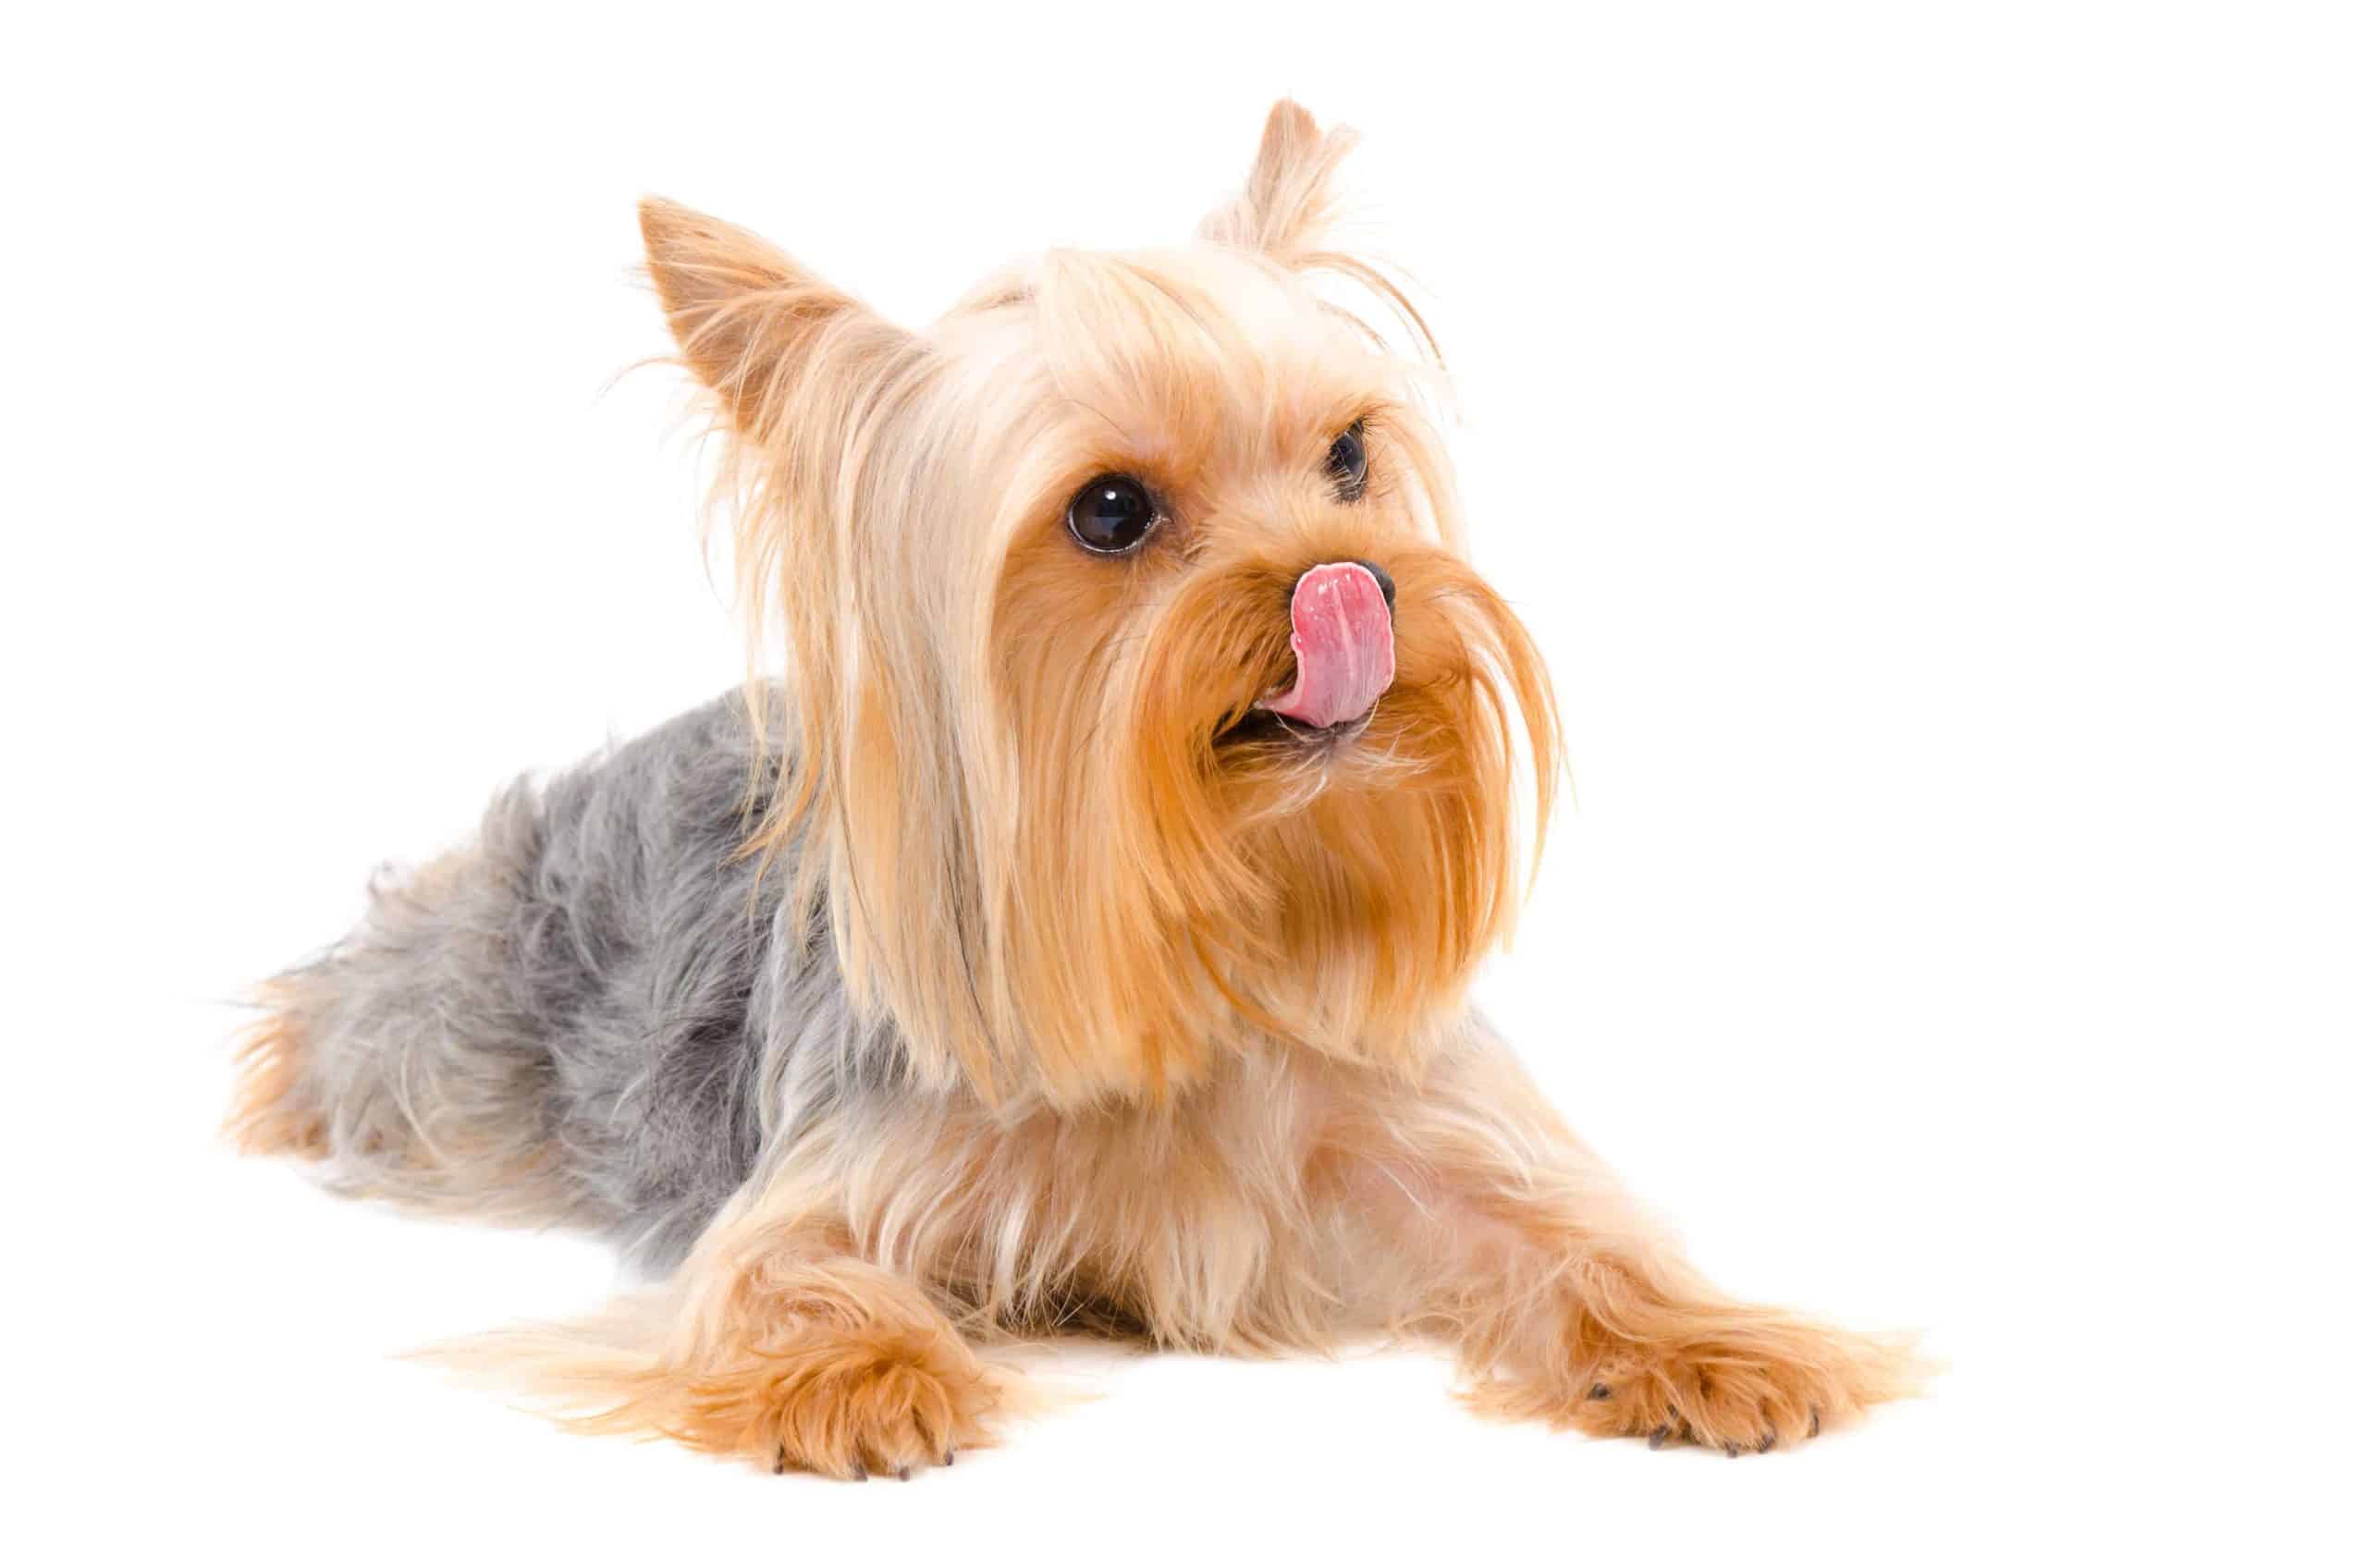 Yorkie licks its lips. Part of determining your dog's nutritional needs is making sure the dog gets the right amount of calories. For example, a Great Dane needs to consume more calories than a Yorkie does.